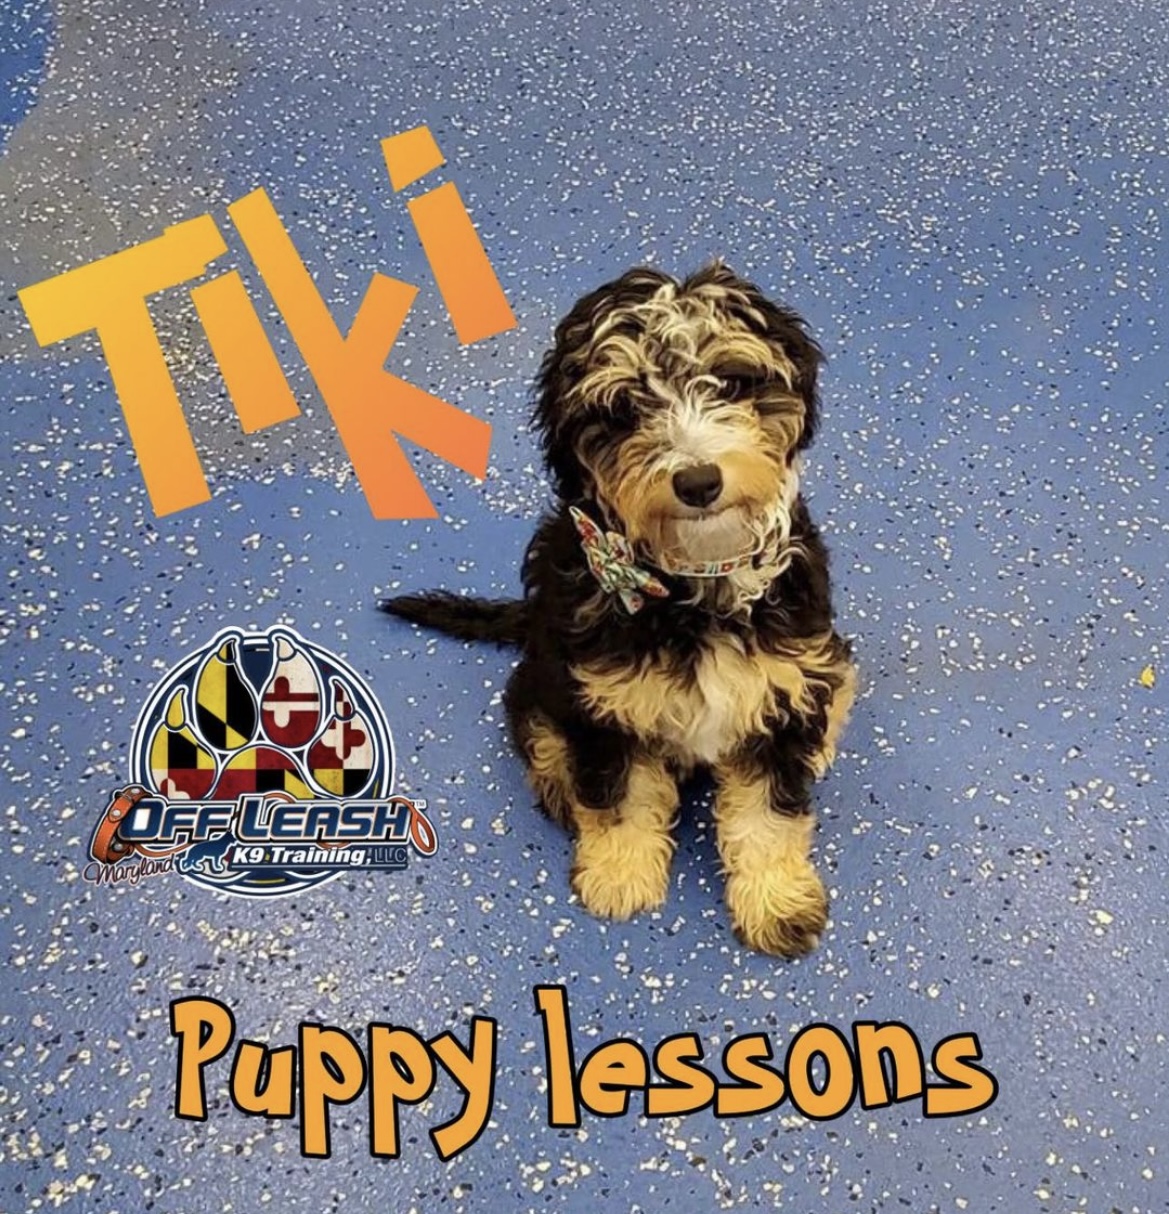 Puppy named Tiki who completed our puppy training lessons